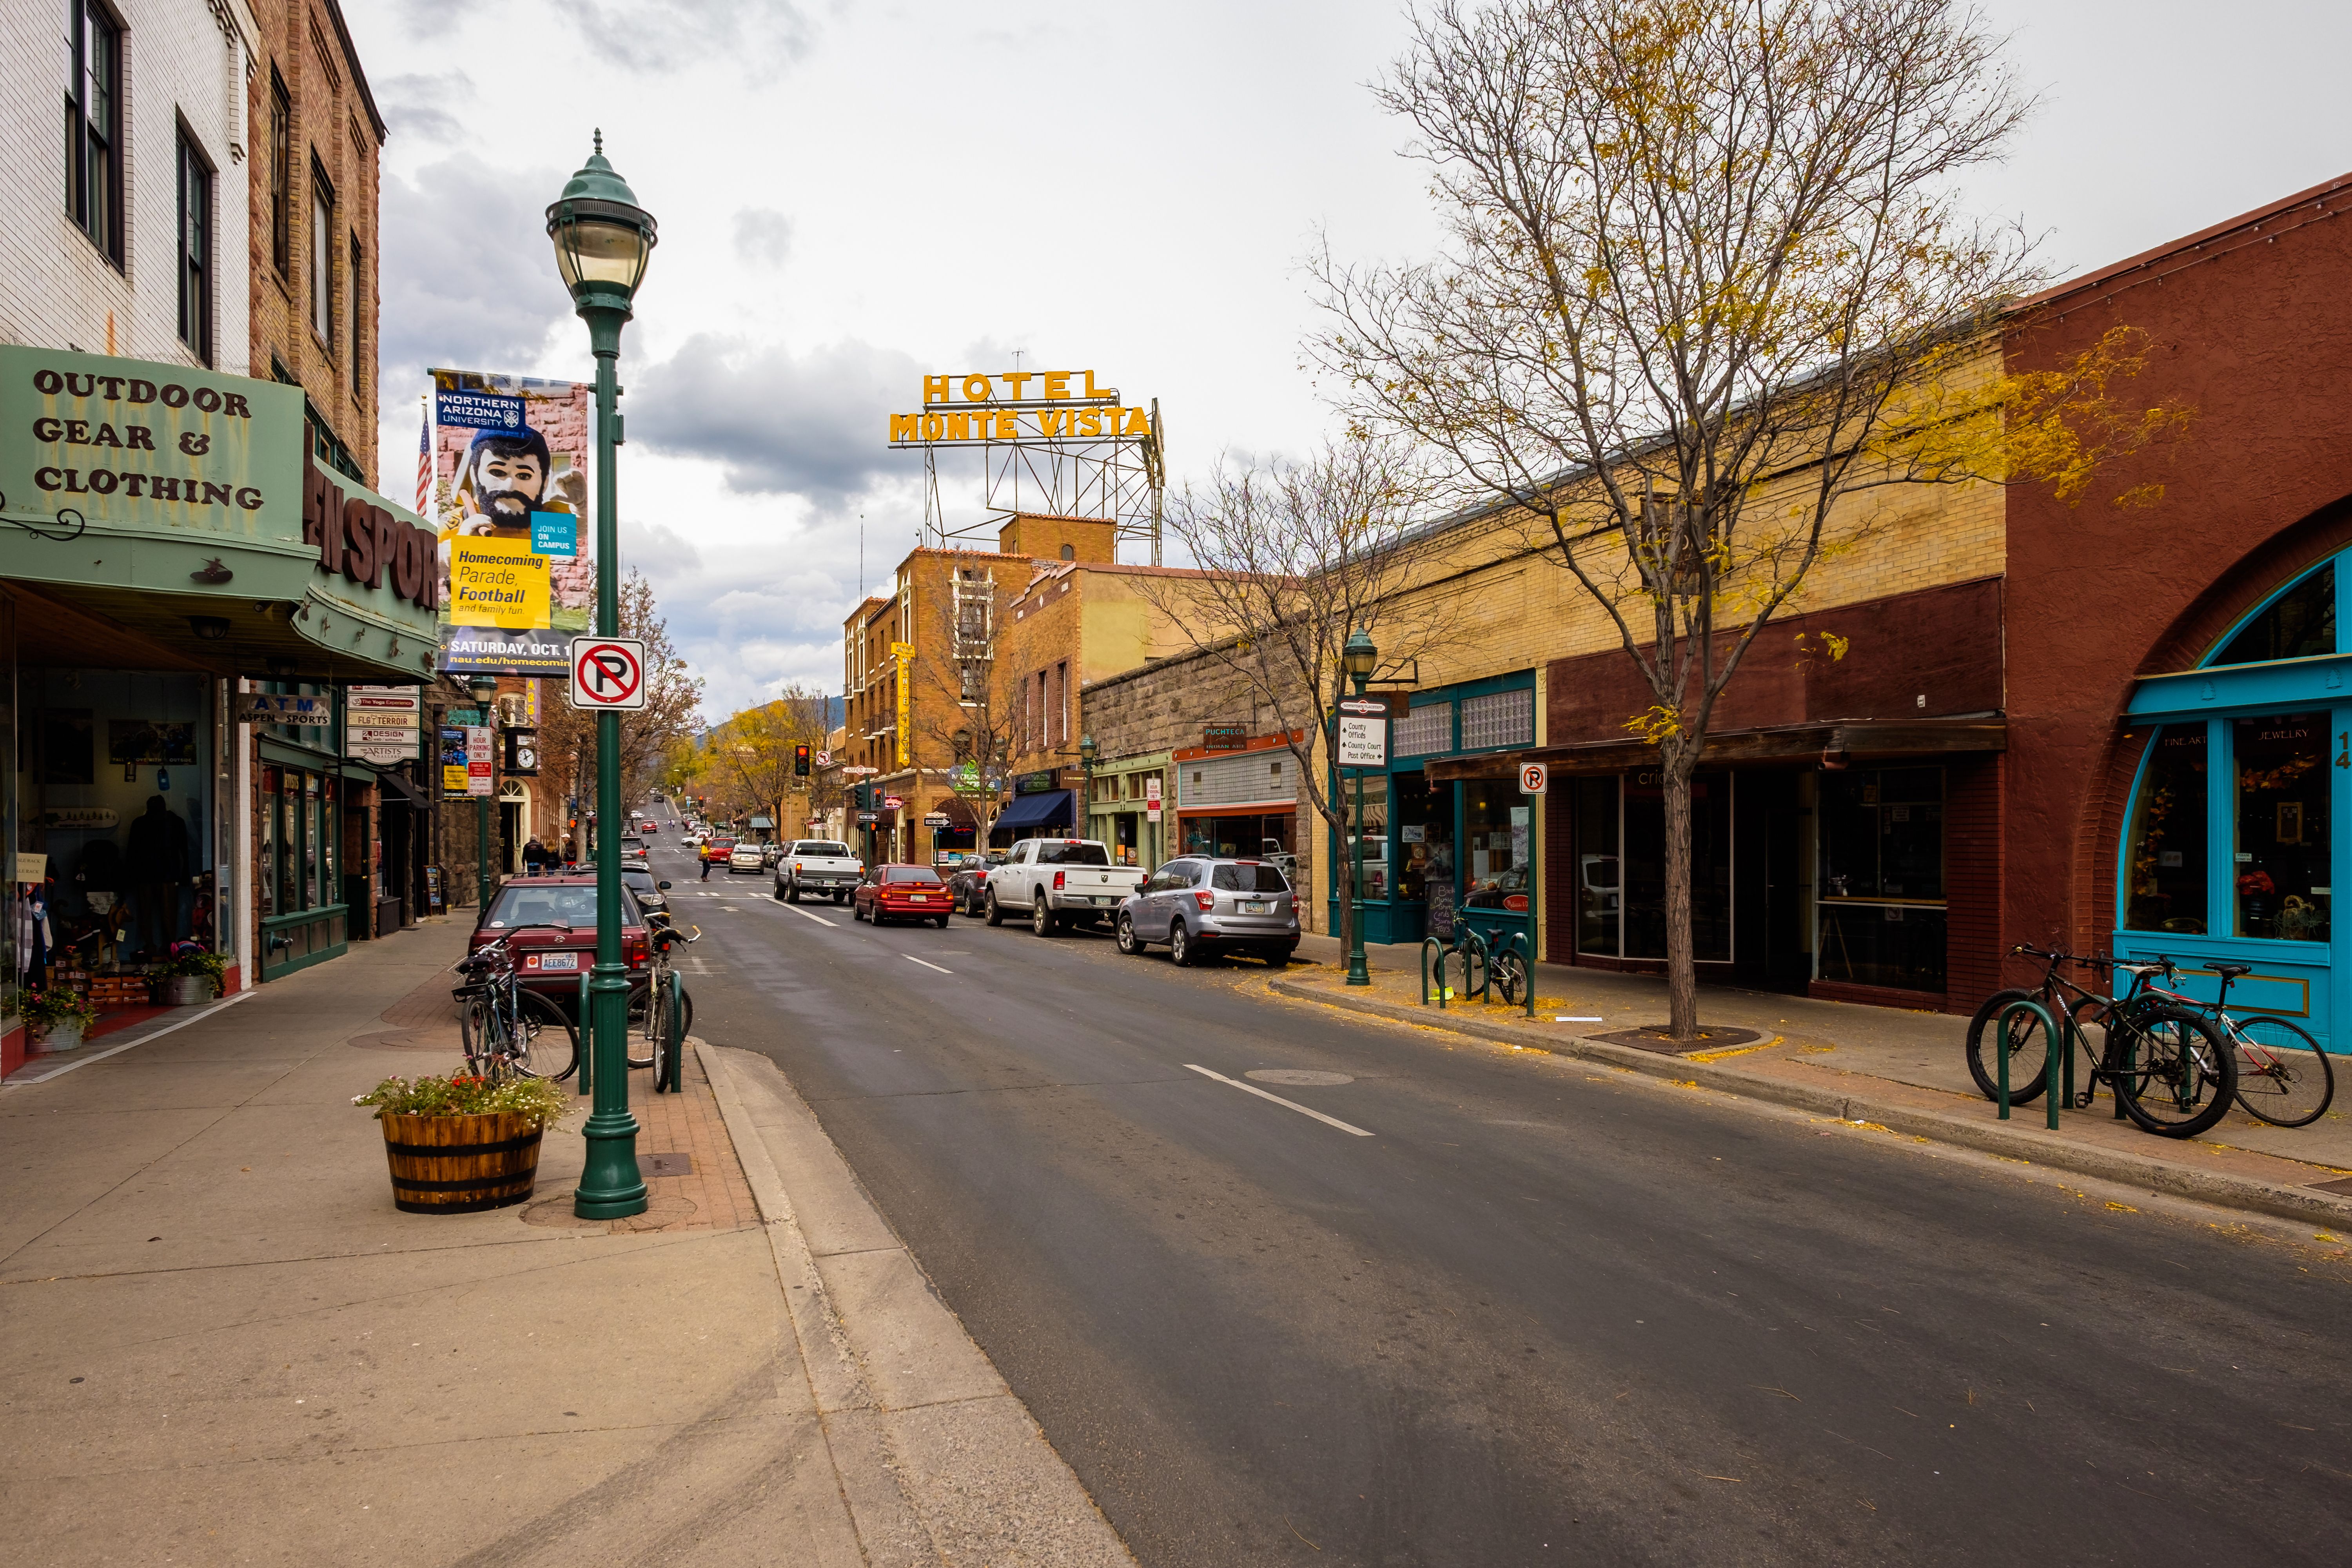 Flagstaff, AZ USA - October 24, 2016: Cityscape view of the historic downtown area with vintage architecture.